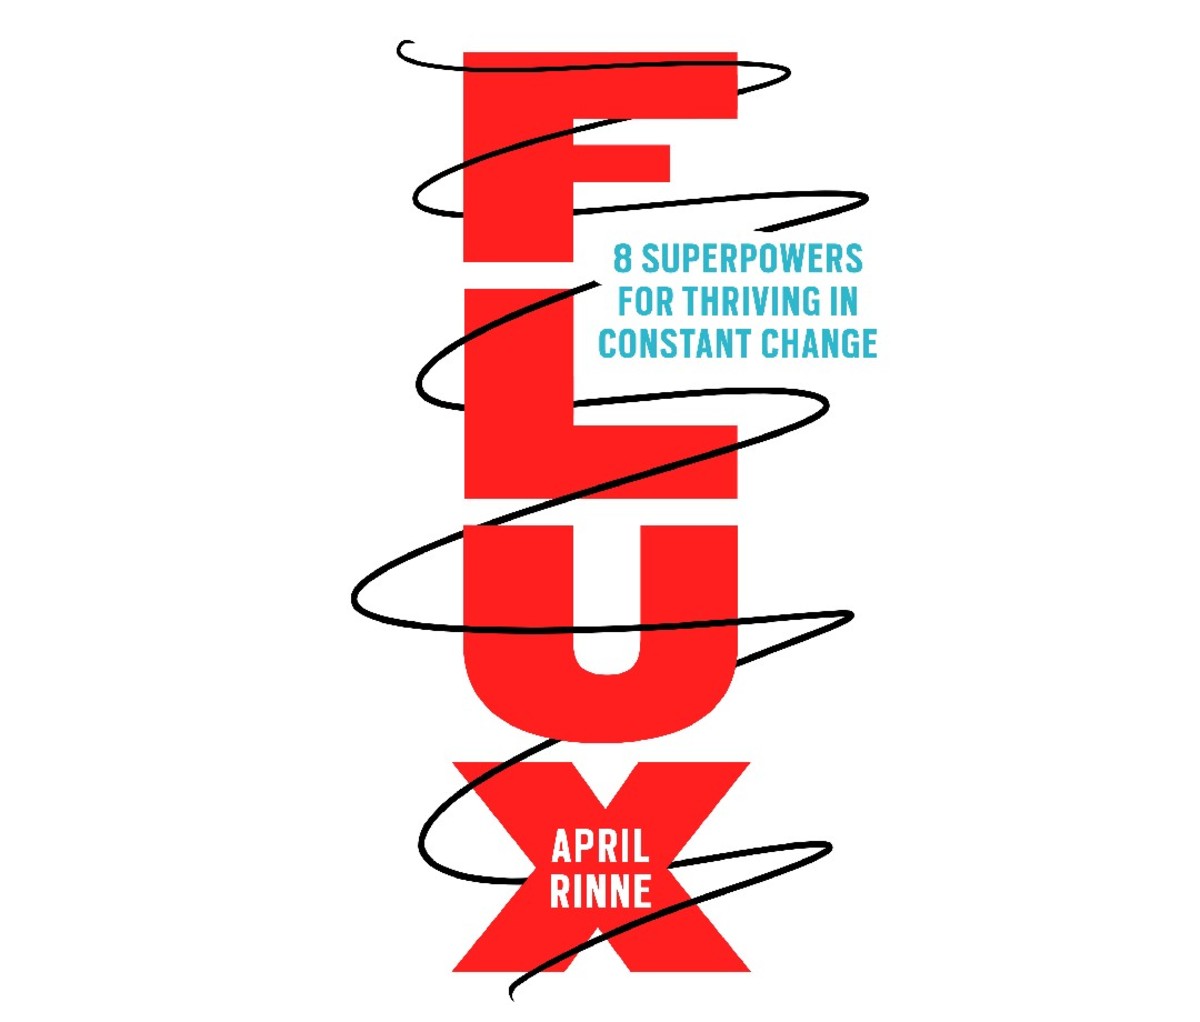 Flux: 8 Superpowers for Thriving in Constant Change by April Rinne